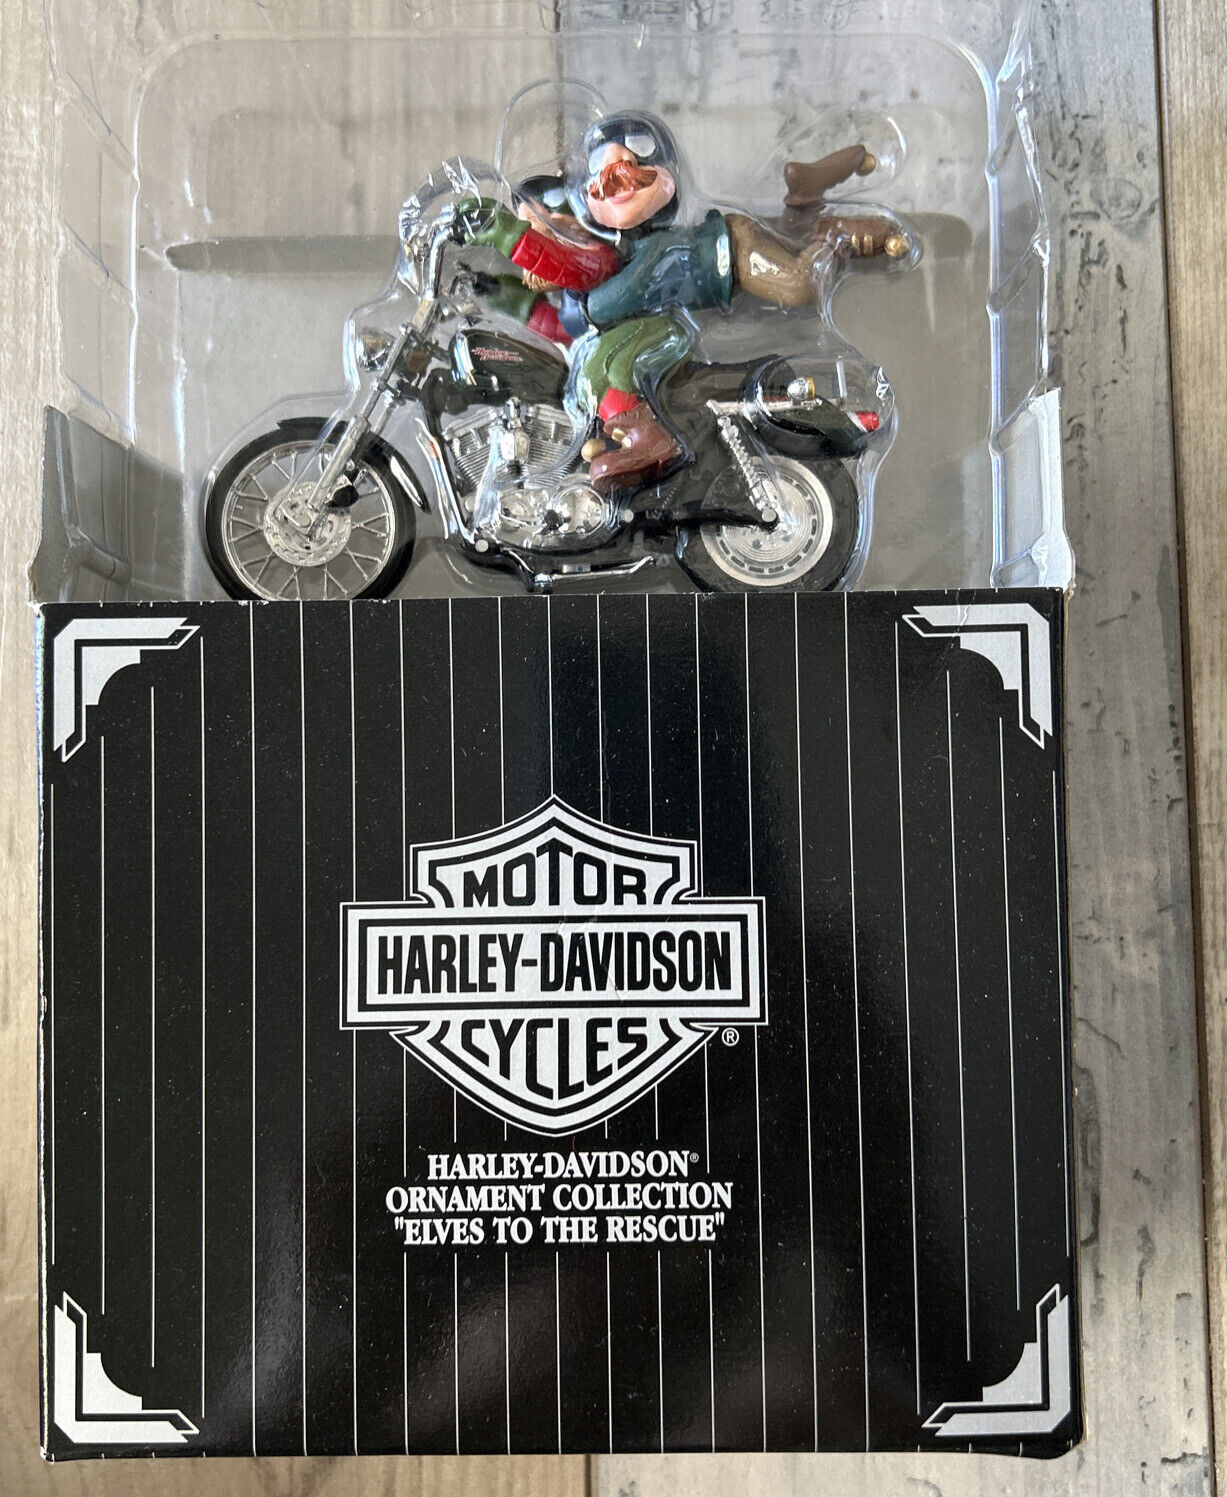 Harley Davidson Ornament Christmas Elves to the Rescue Boxed